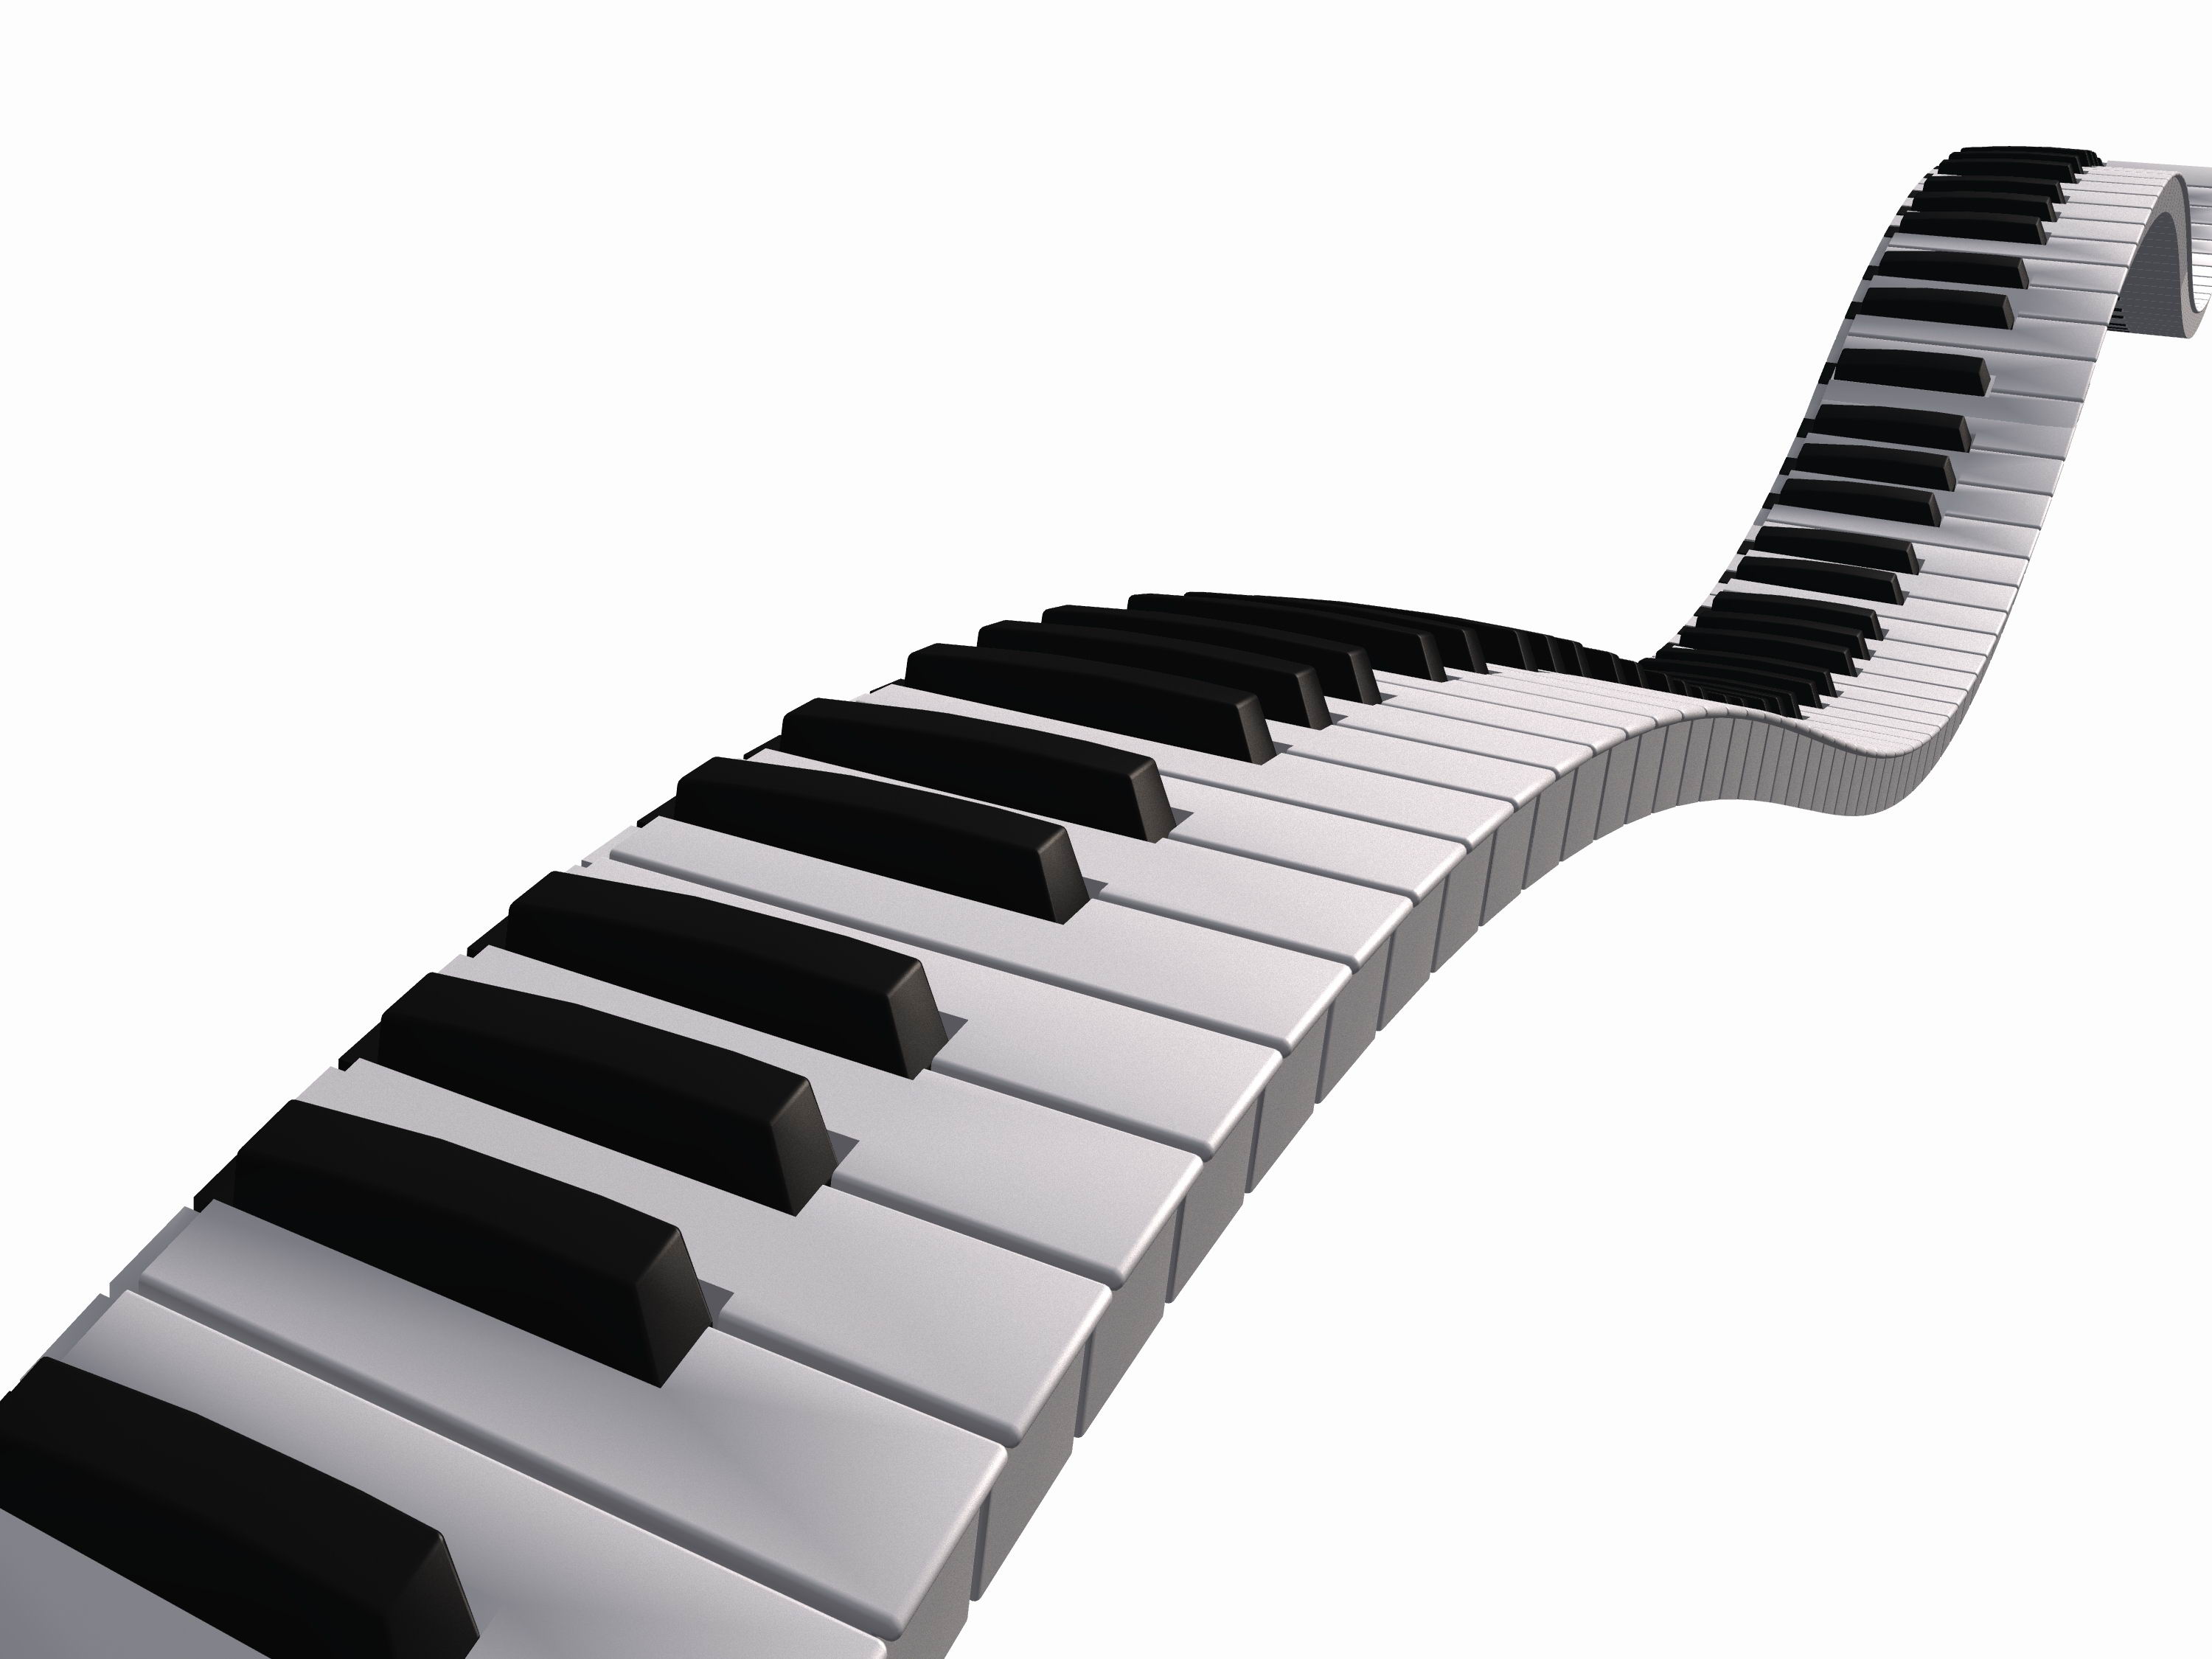 Piano Keyboard Clipart | Clipart library - Free Clipart Images